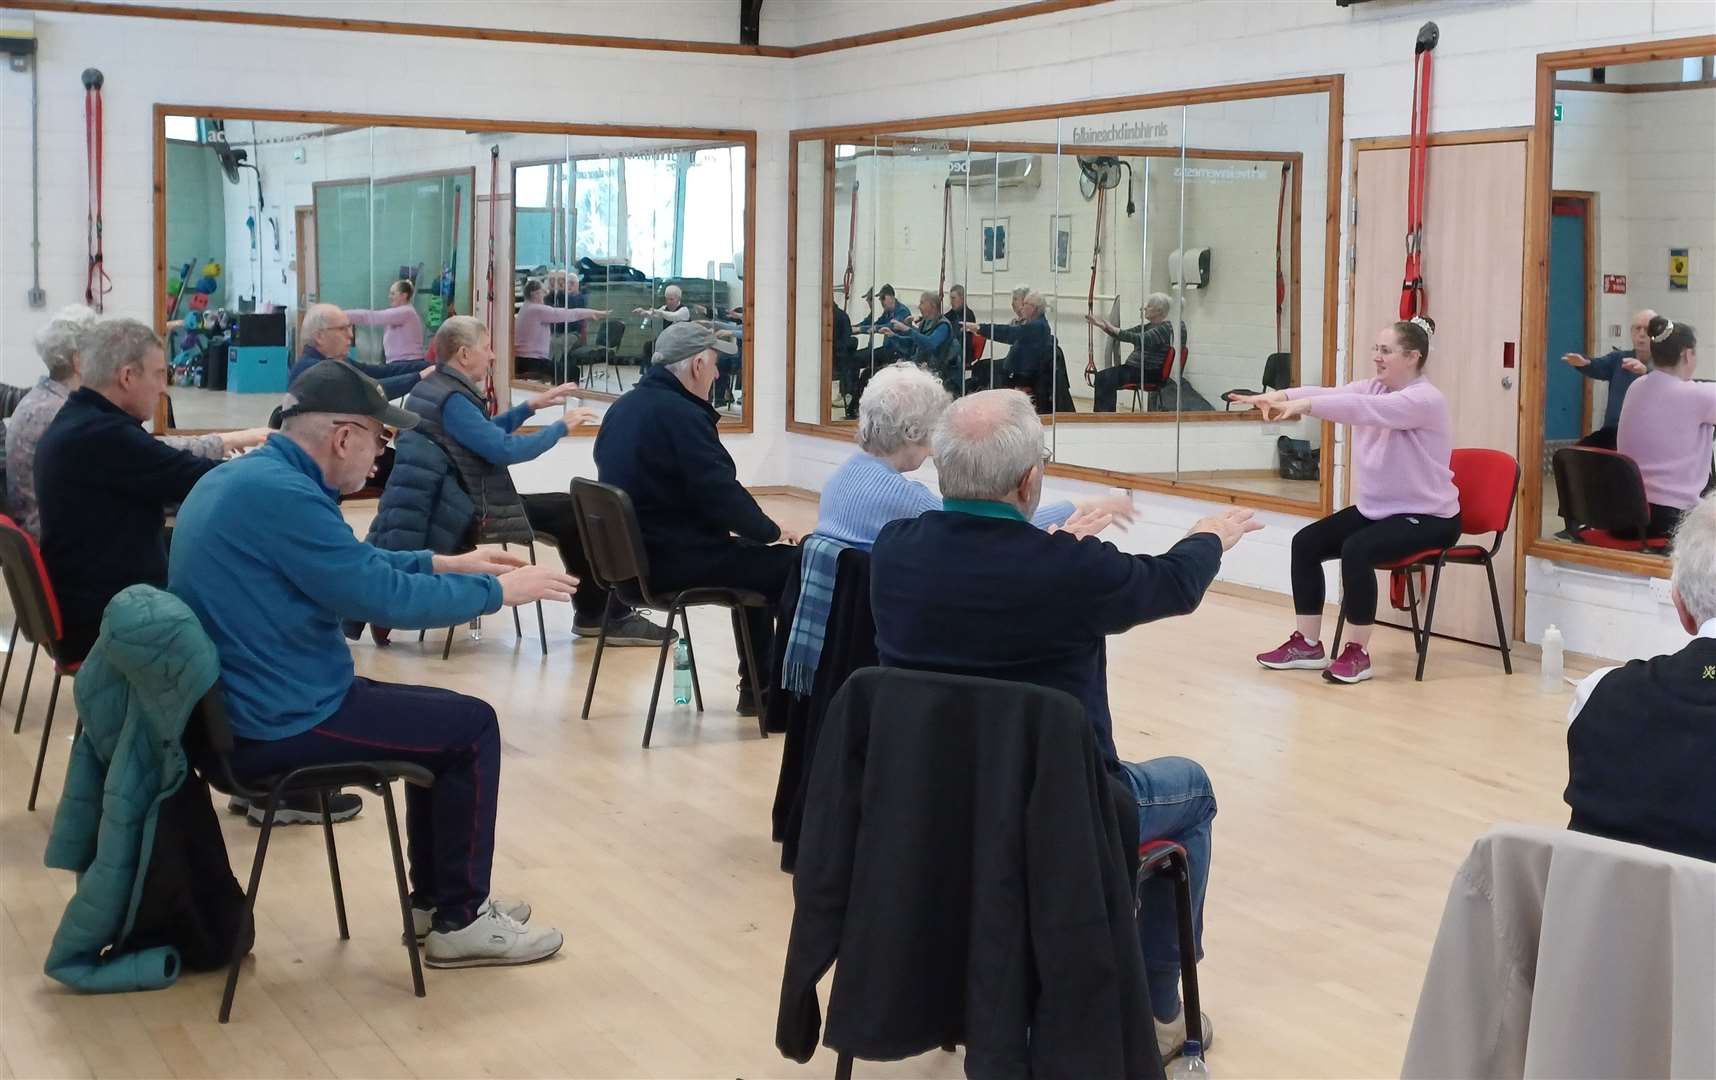 High Life Highland is encouraging people in the Highlands who live with Parkinson's to join one of their specially-designed classes.